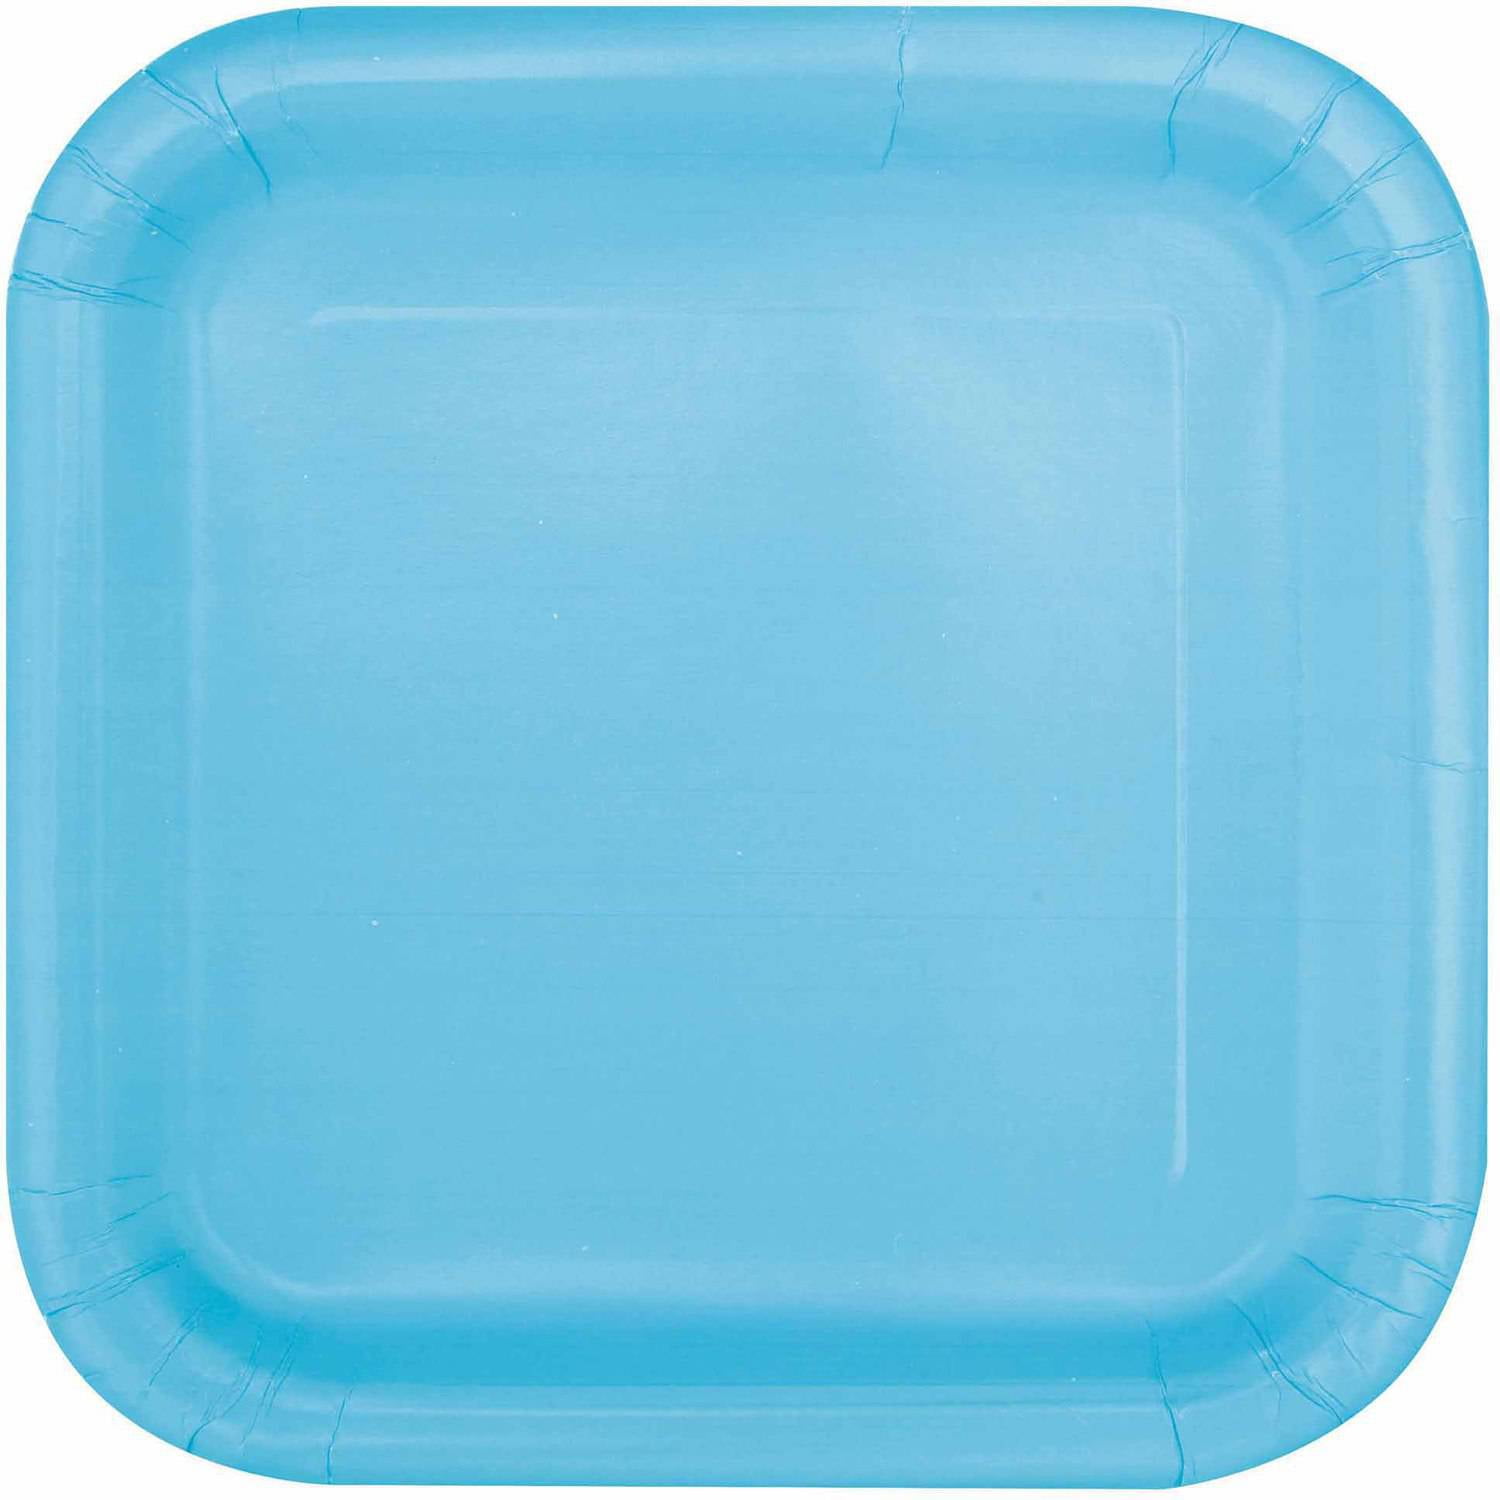 Comfy Package 9 Inch Paper Plates Bulk Pack White Disposable Plates Heavy  Duty, 200-Pack